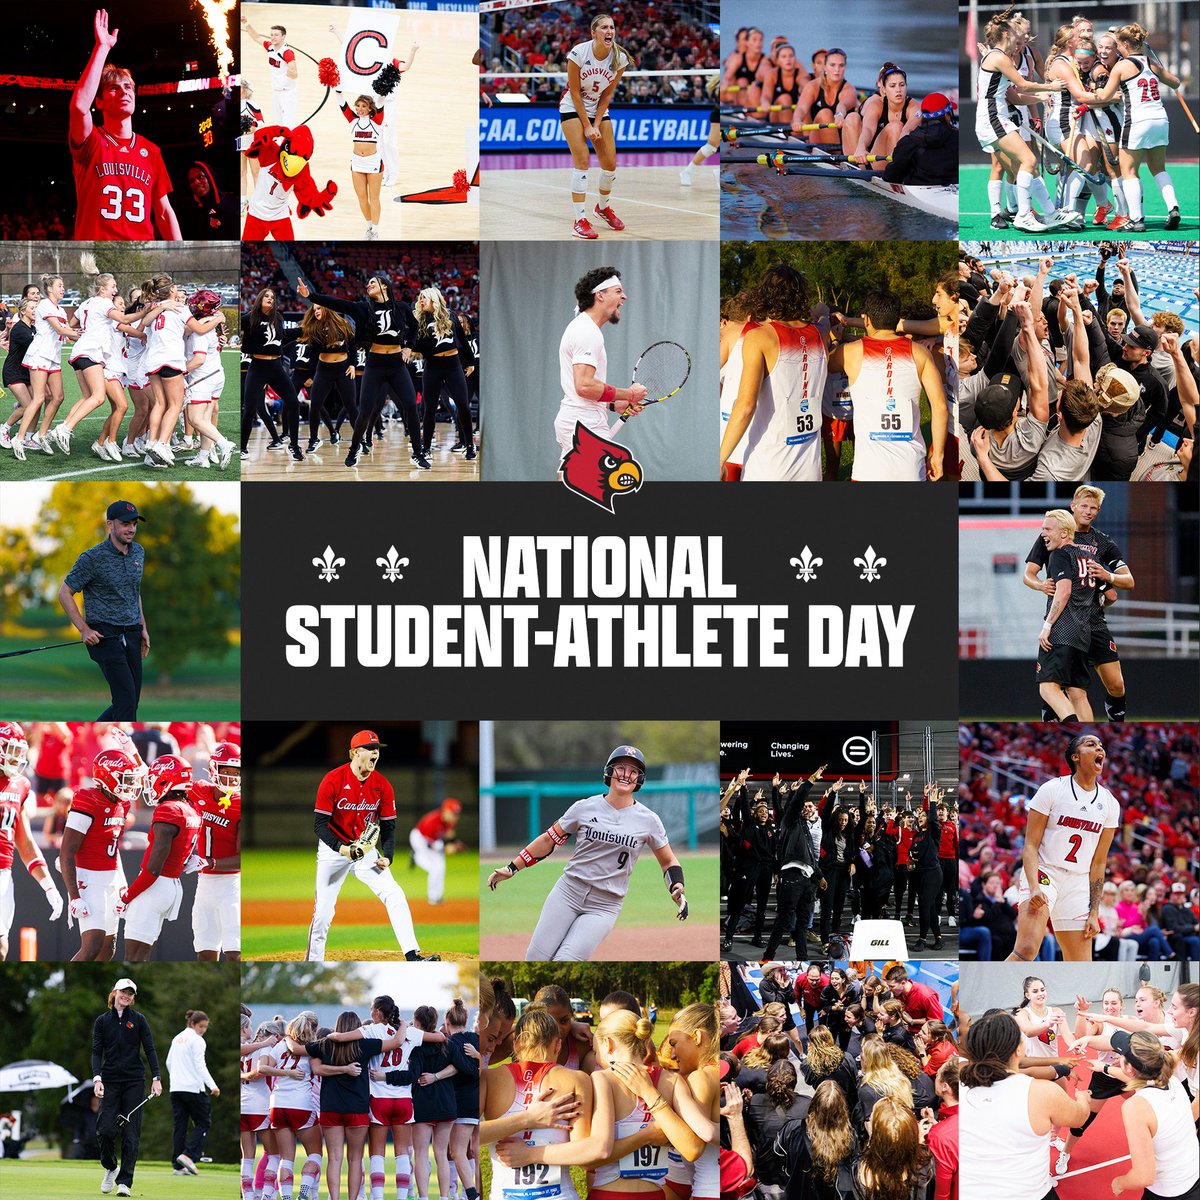 Today we celebrate our student-athletes for their hard work and dedication to their sport, academics and the Louisville community! Happy #NationalStudentAthleteDay ❤️ #GoCards x #ForTheVille